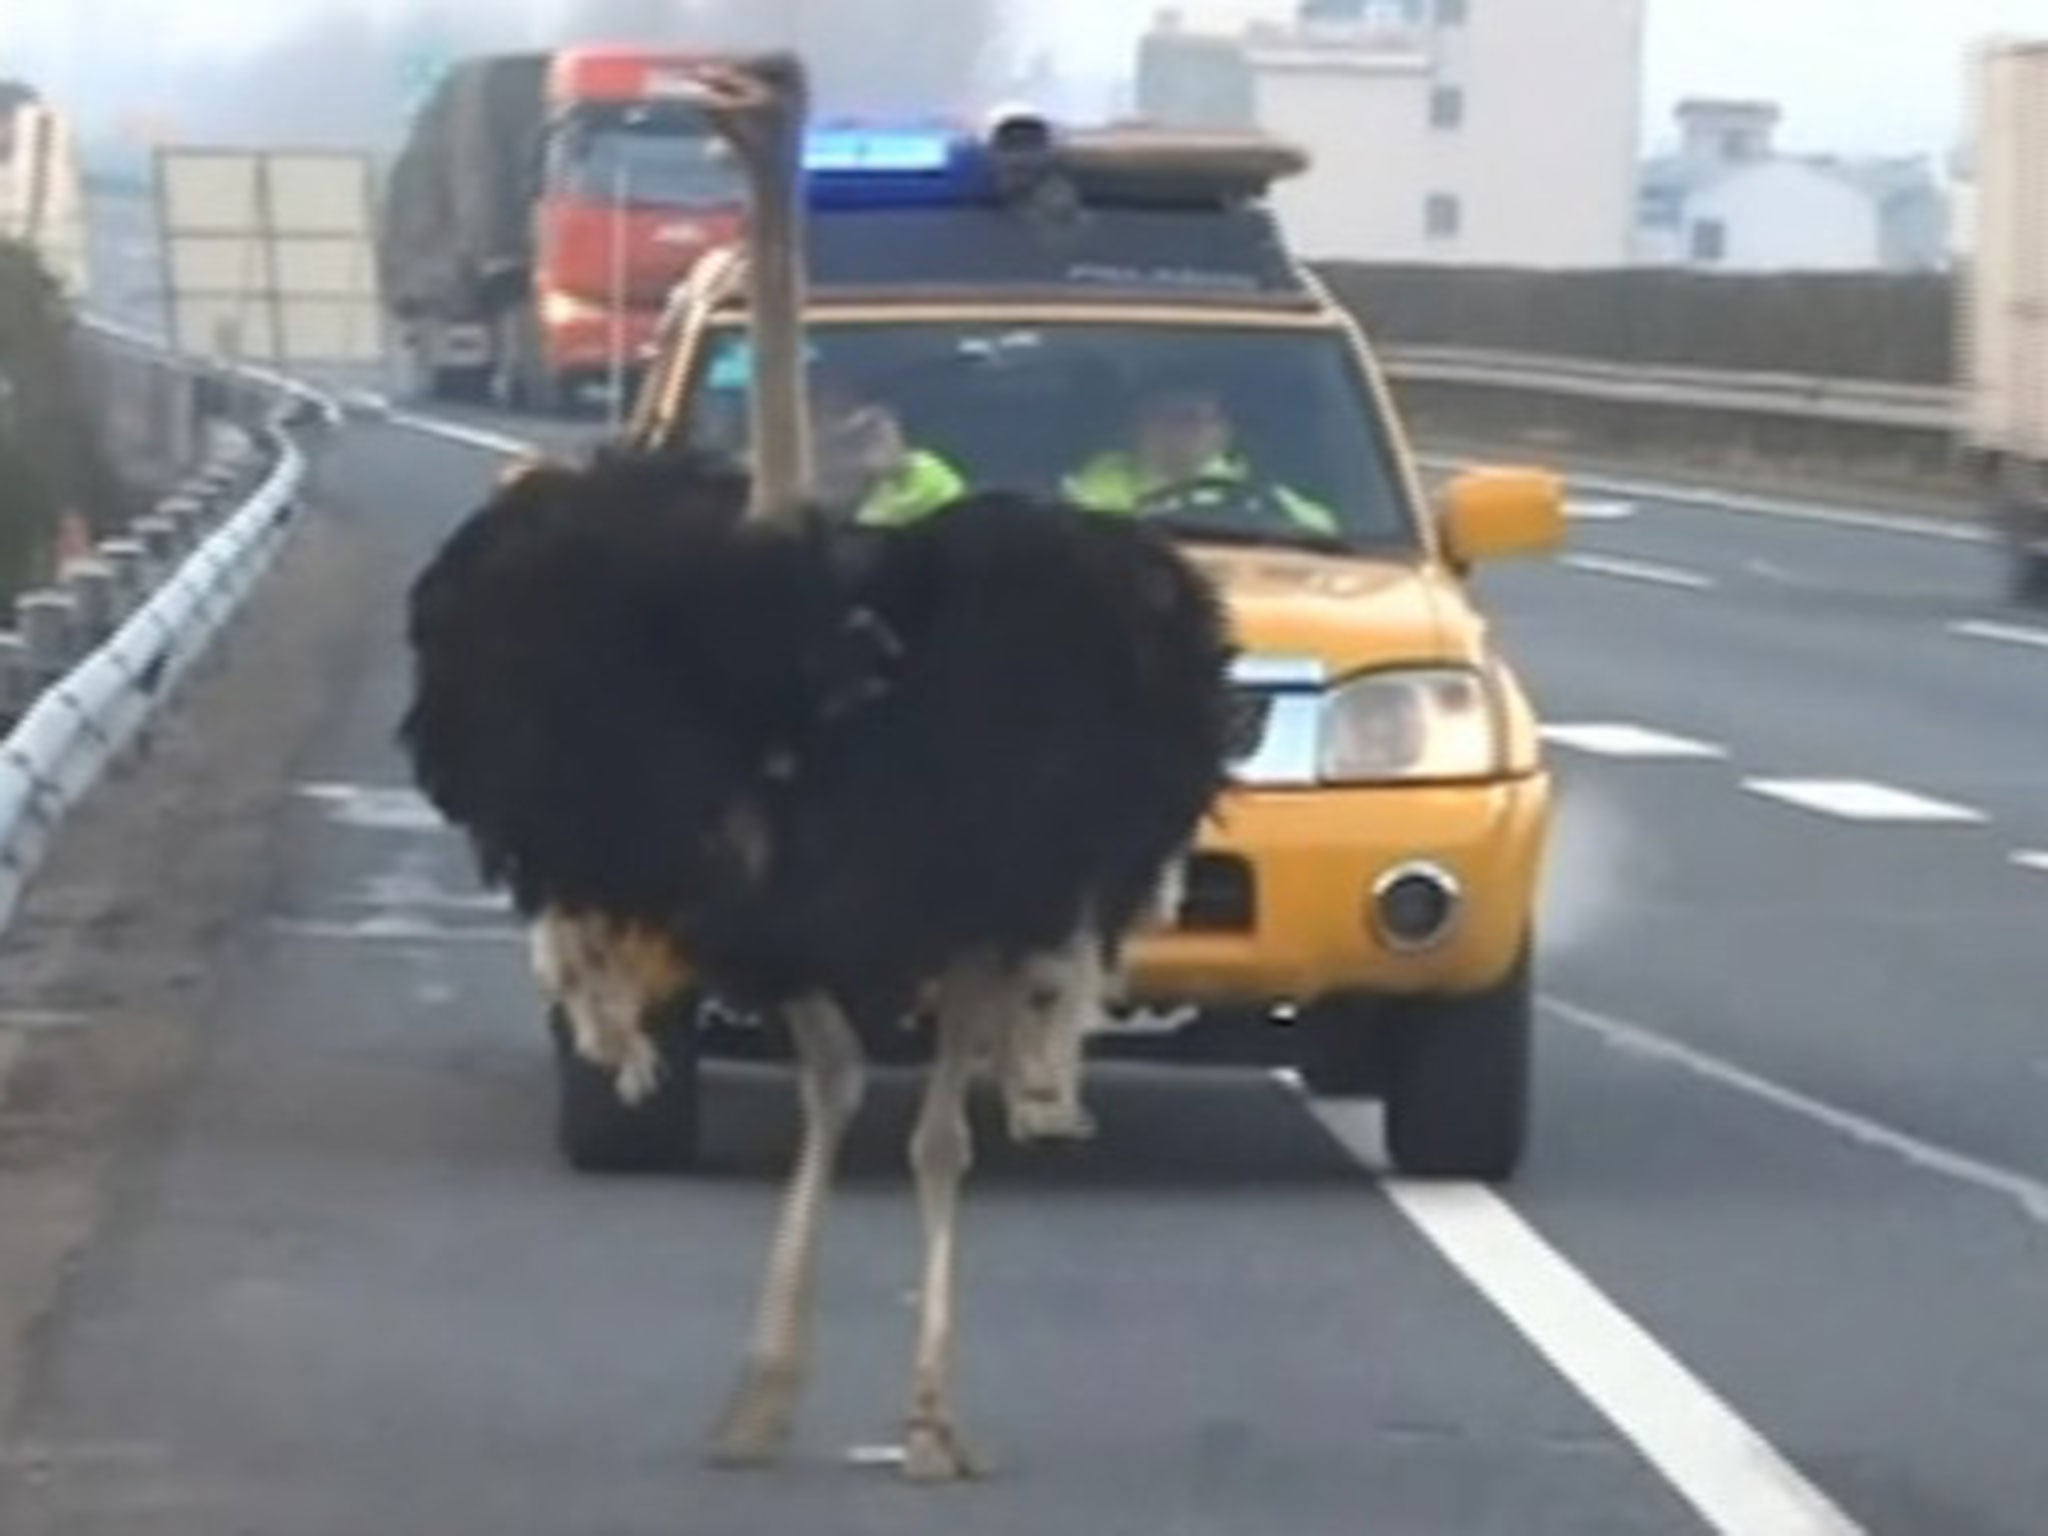 The ostrich was eventually chased down by police on the hard shoulder of the highway